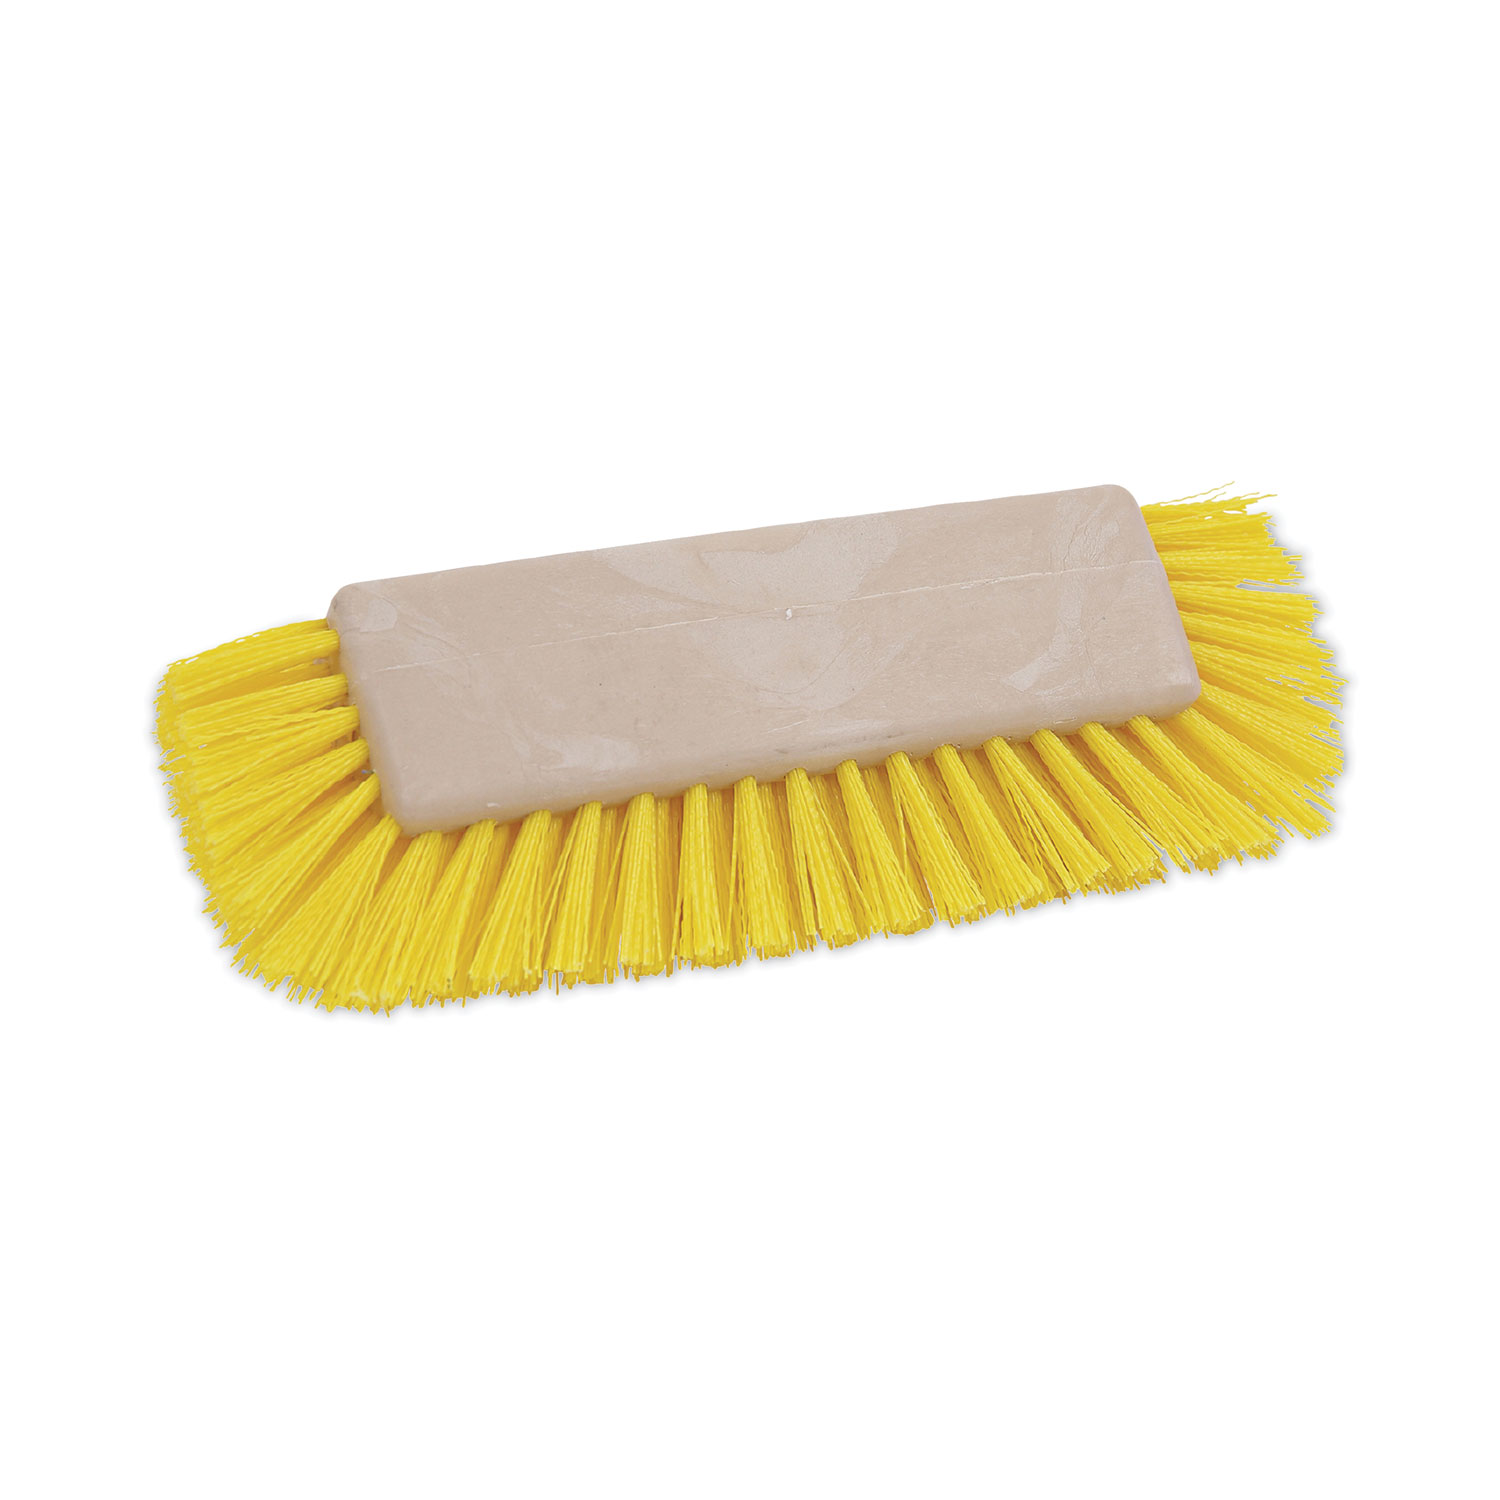 Polypropylene Bristle Parts Cleaning Brushes